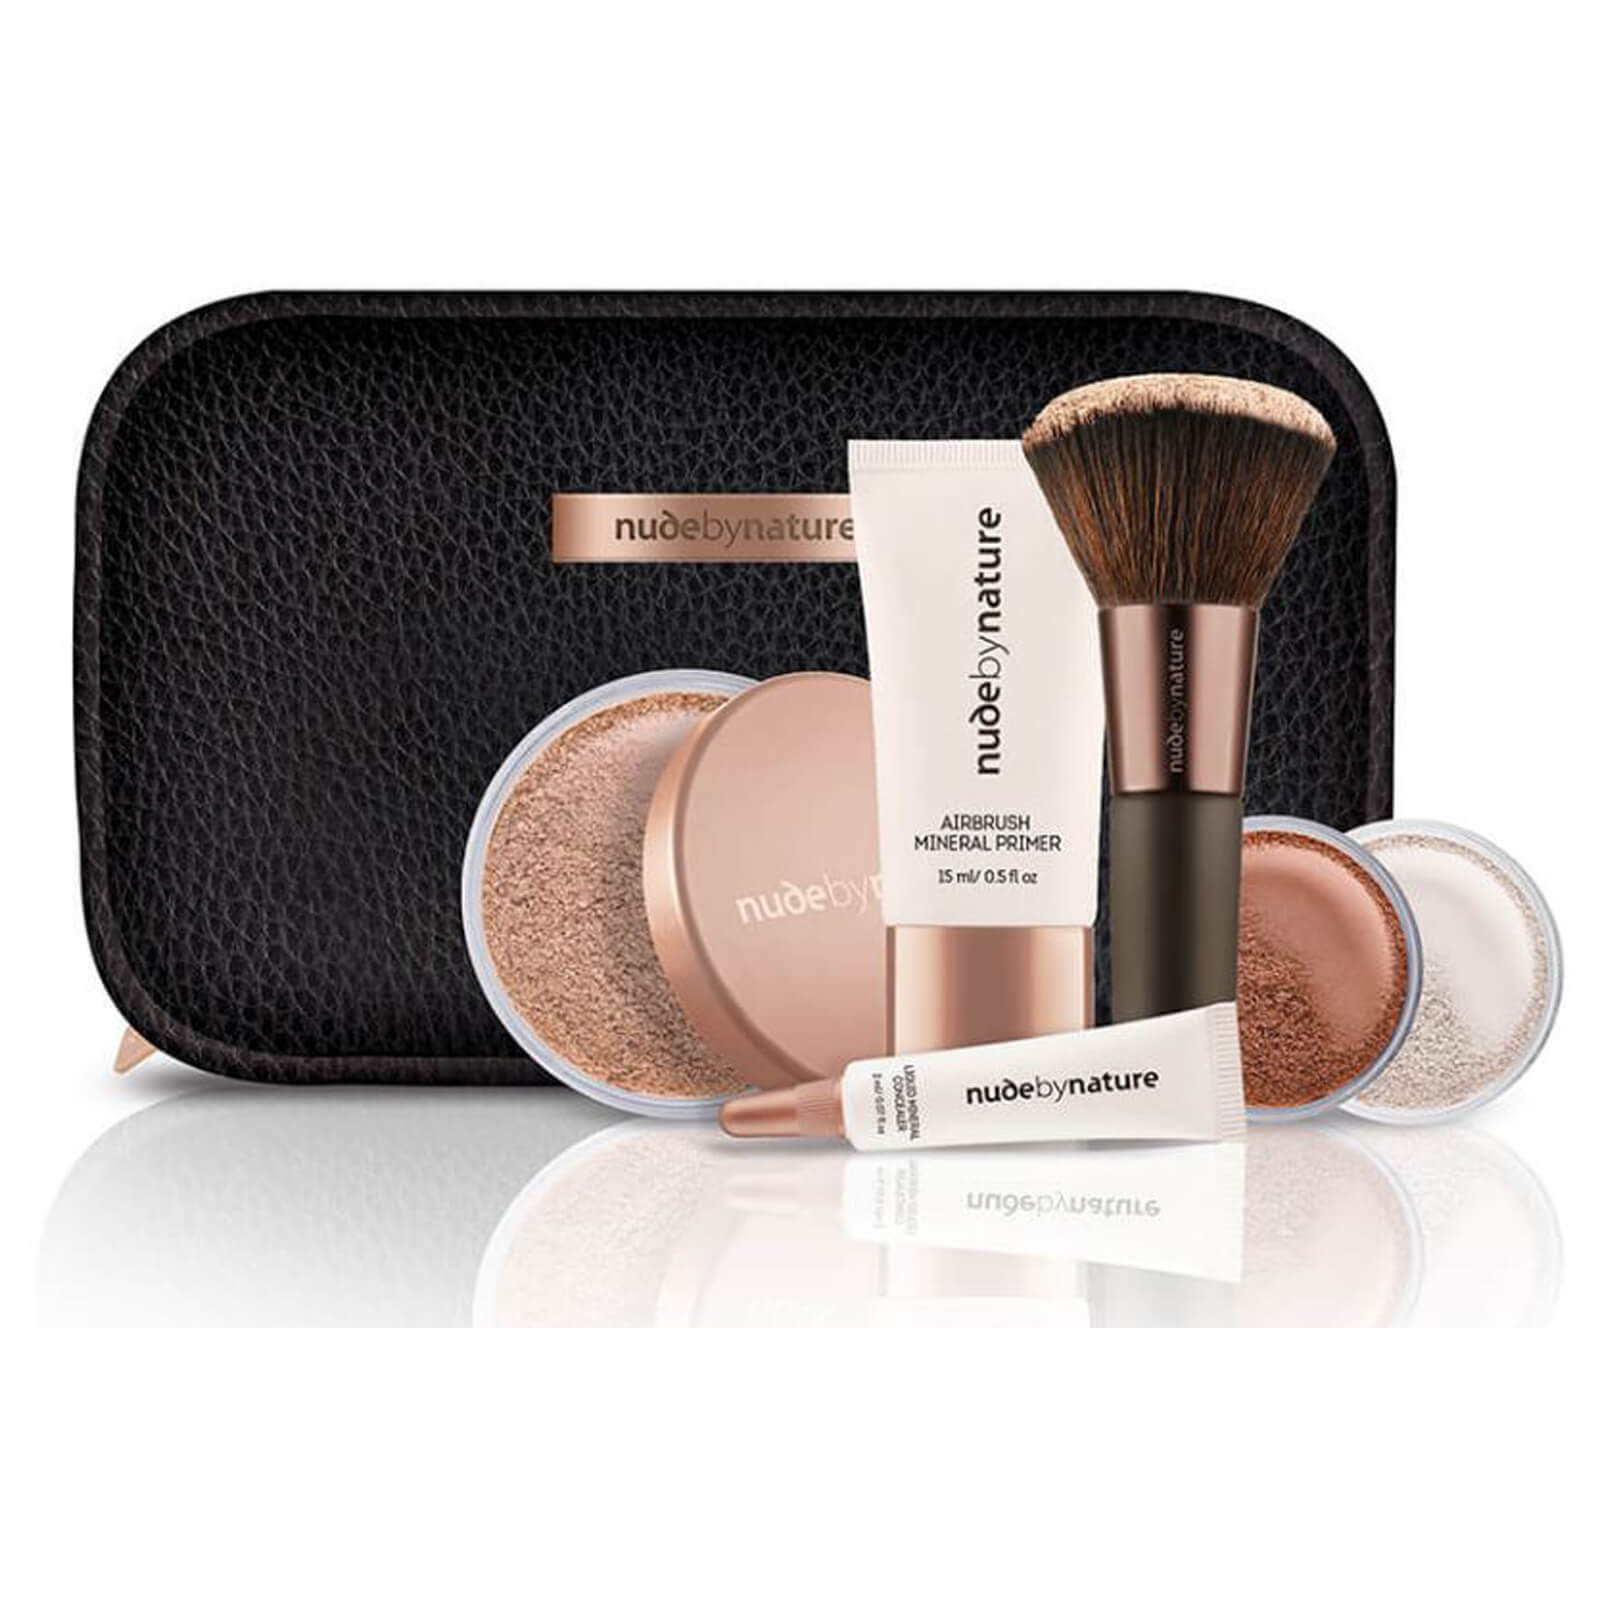 nude by nature Complexion Essentials Starter Kit - Light